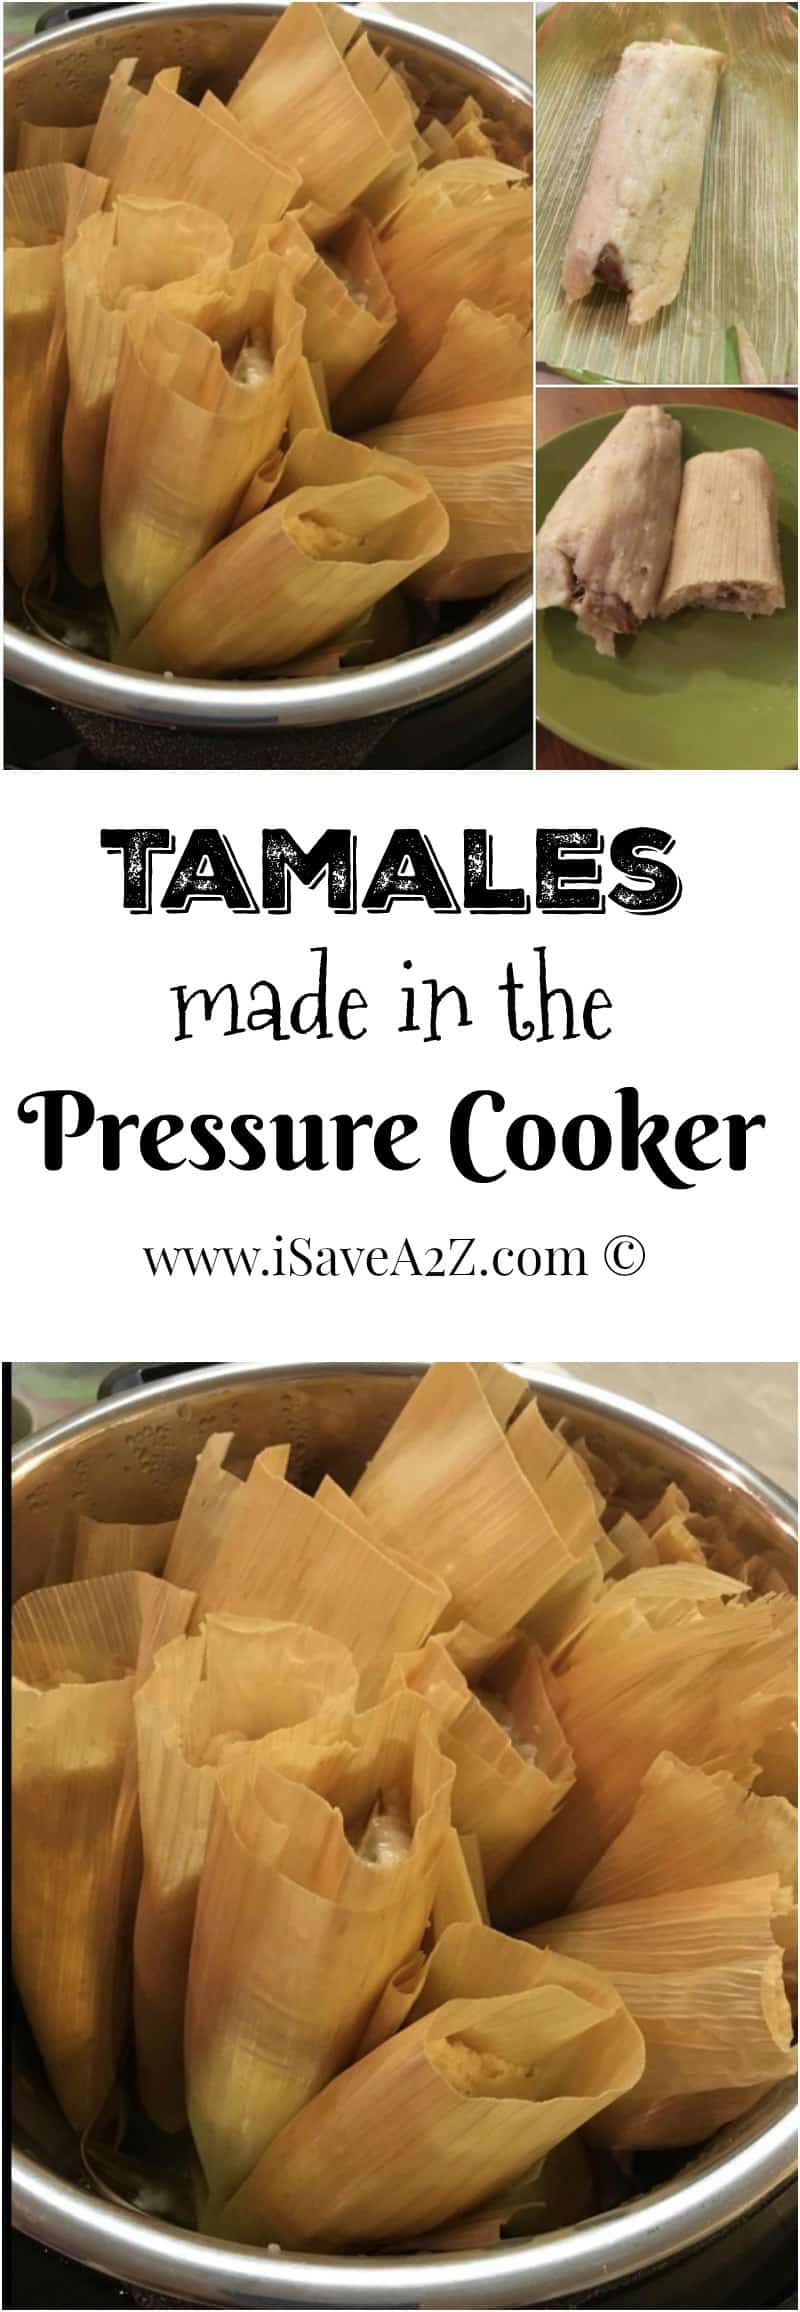 https://www.isavea2z.com/wp-content/uploads/2016/12/Tamales-made-in-the-Pressure-Cooker.jpg